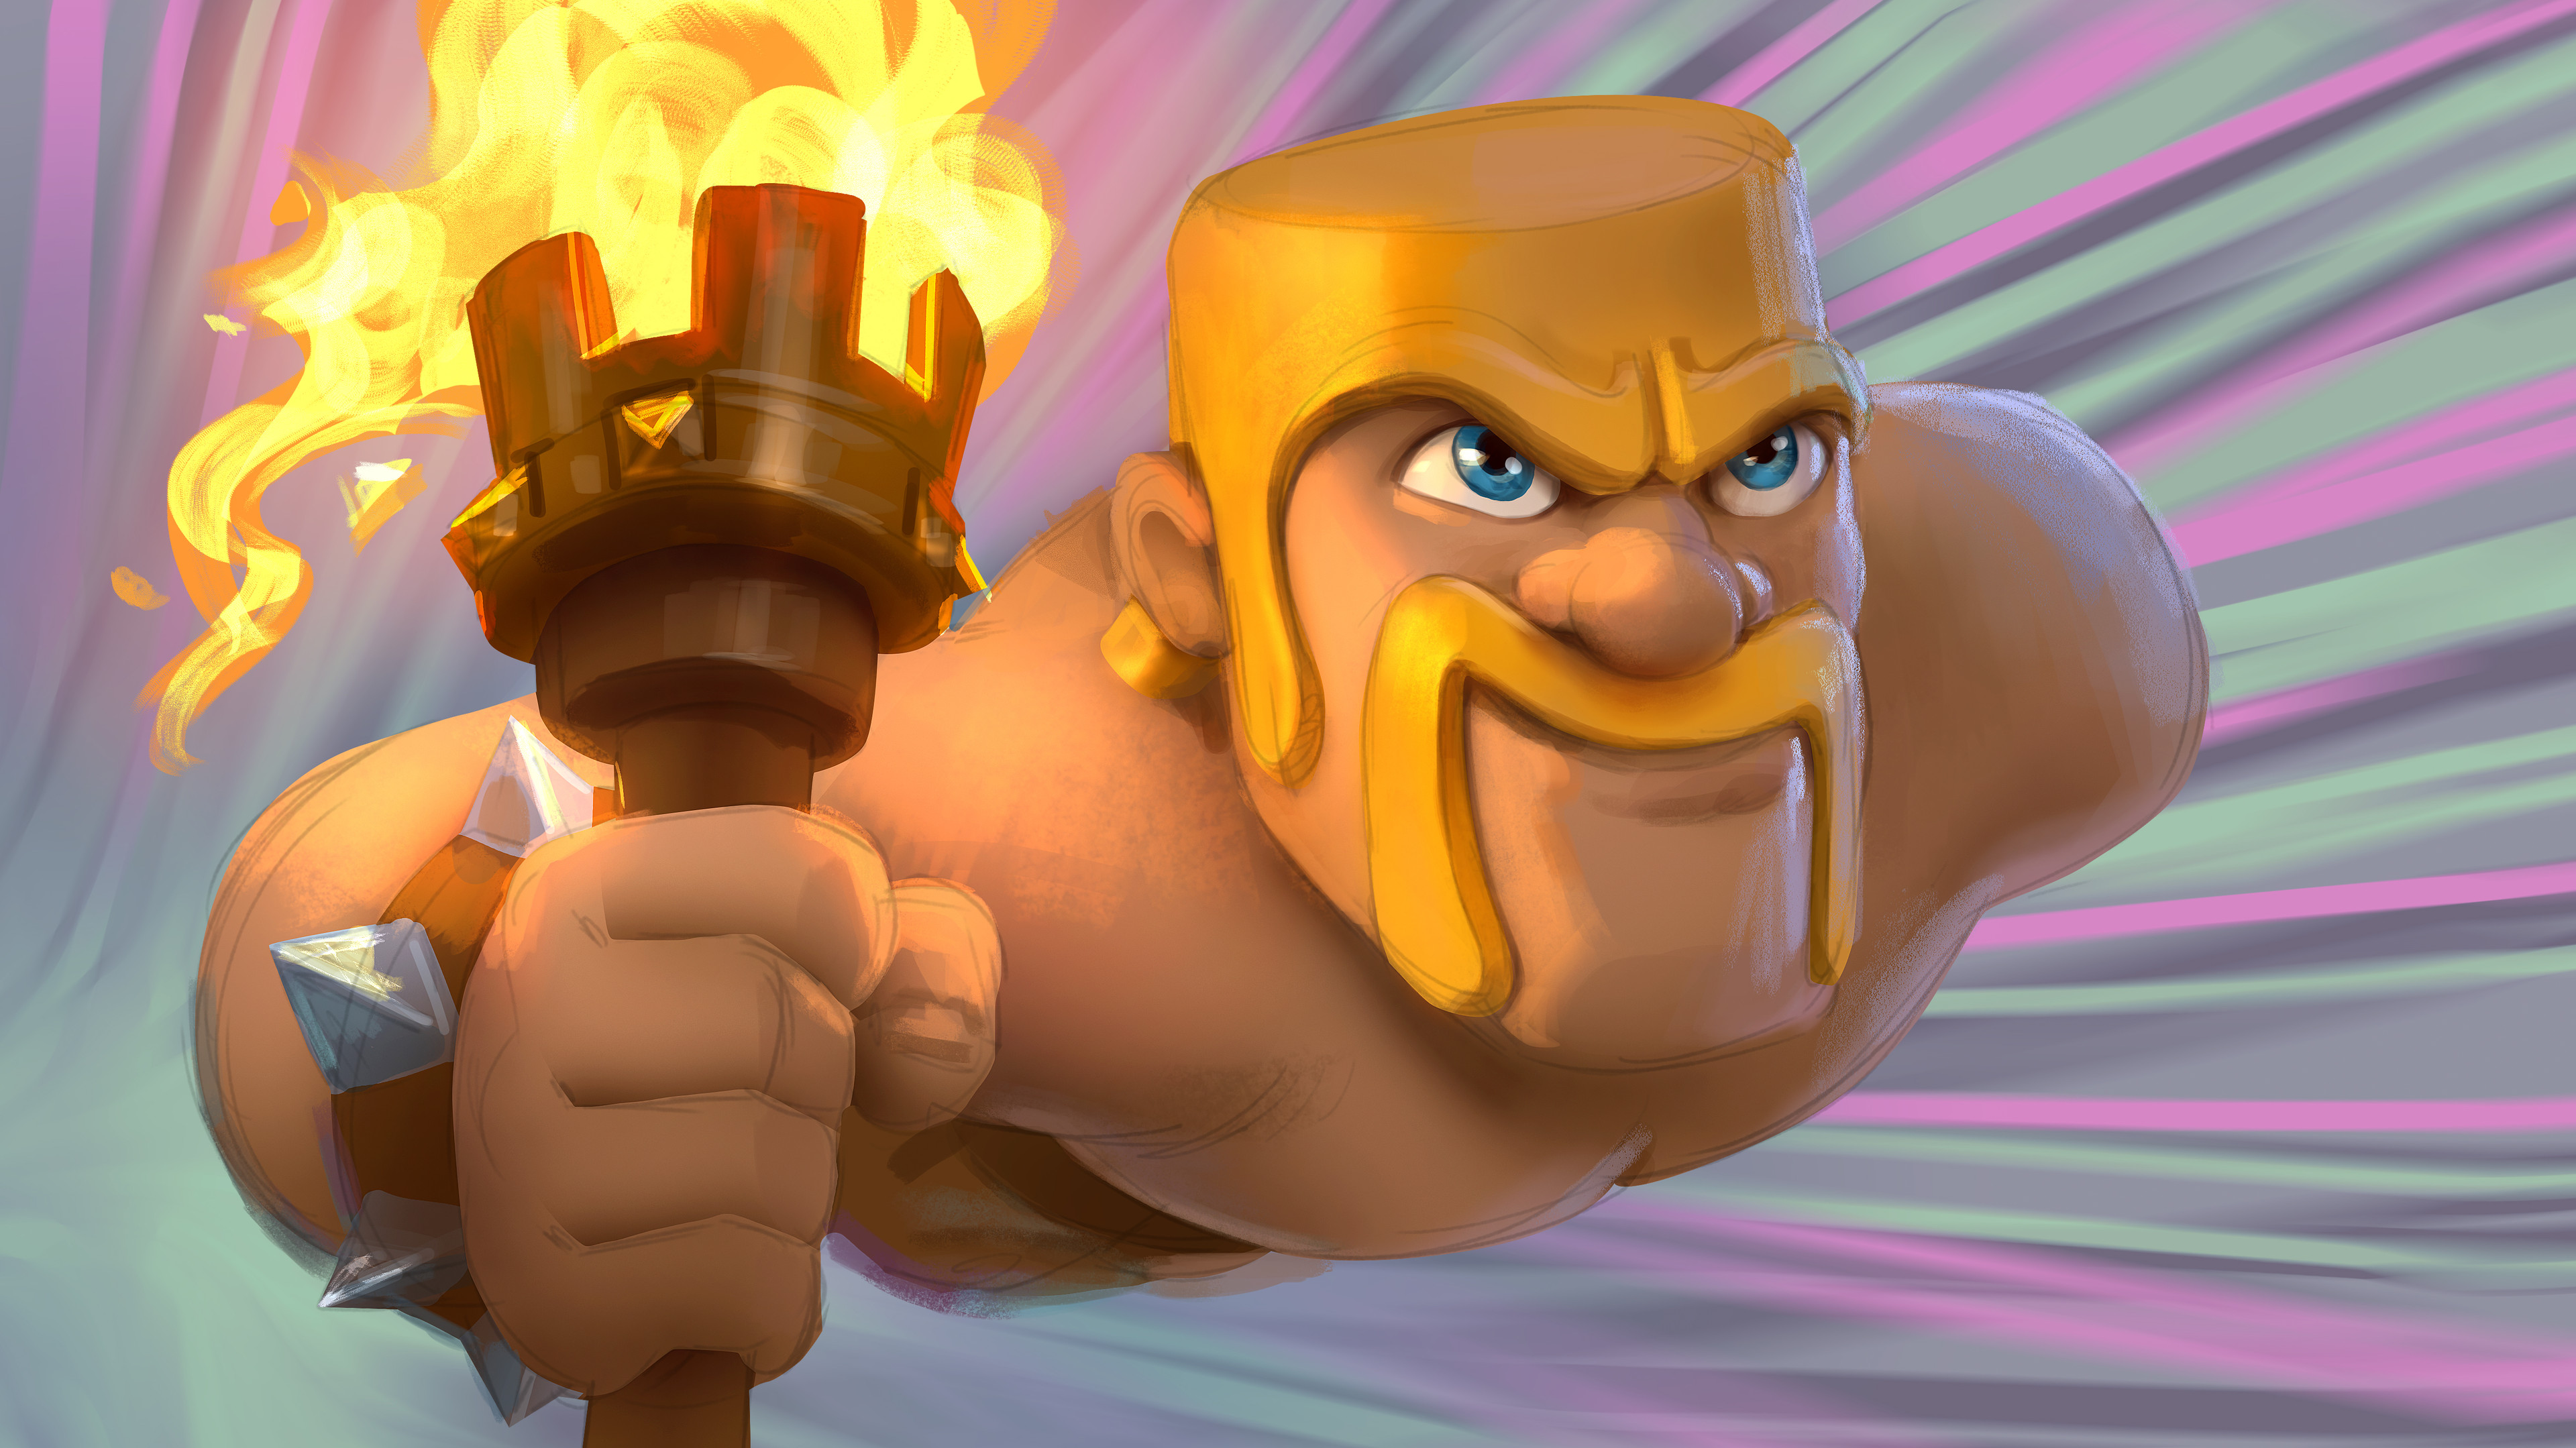 HD Wallpapers for Clash Royale Android क लए APK डउनलड कर